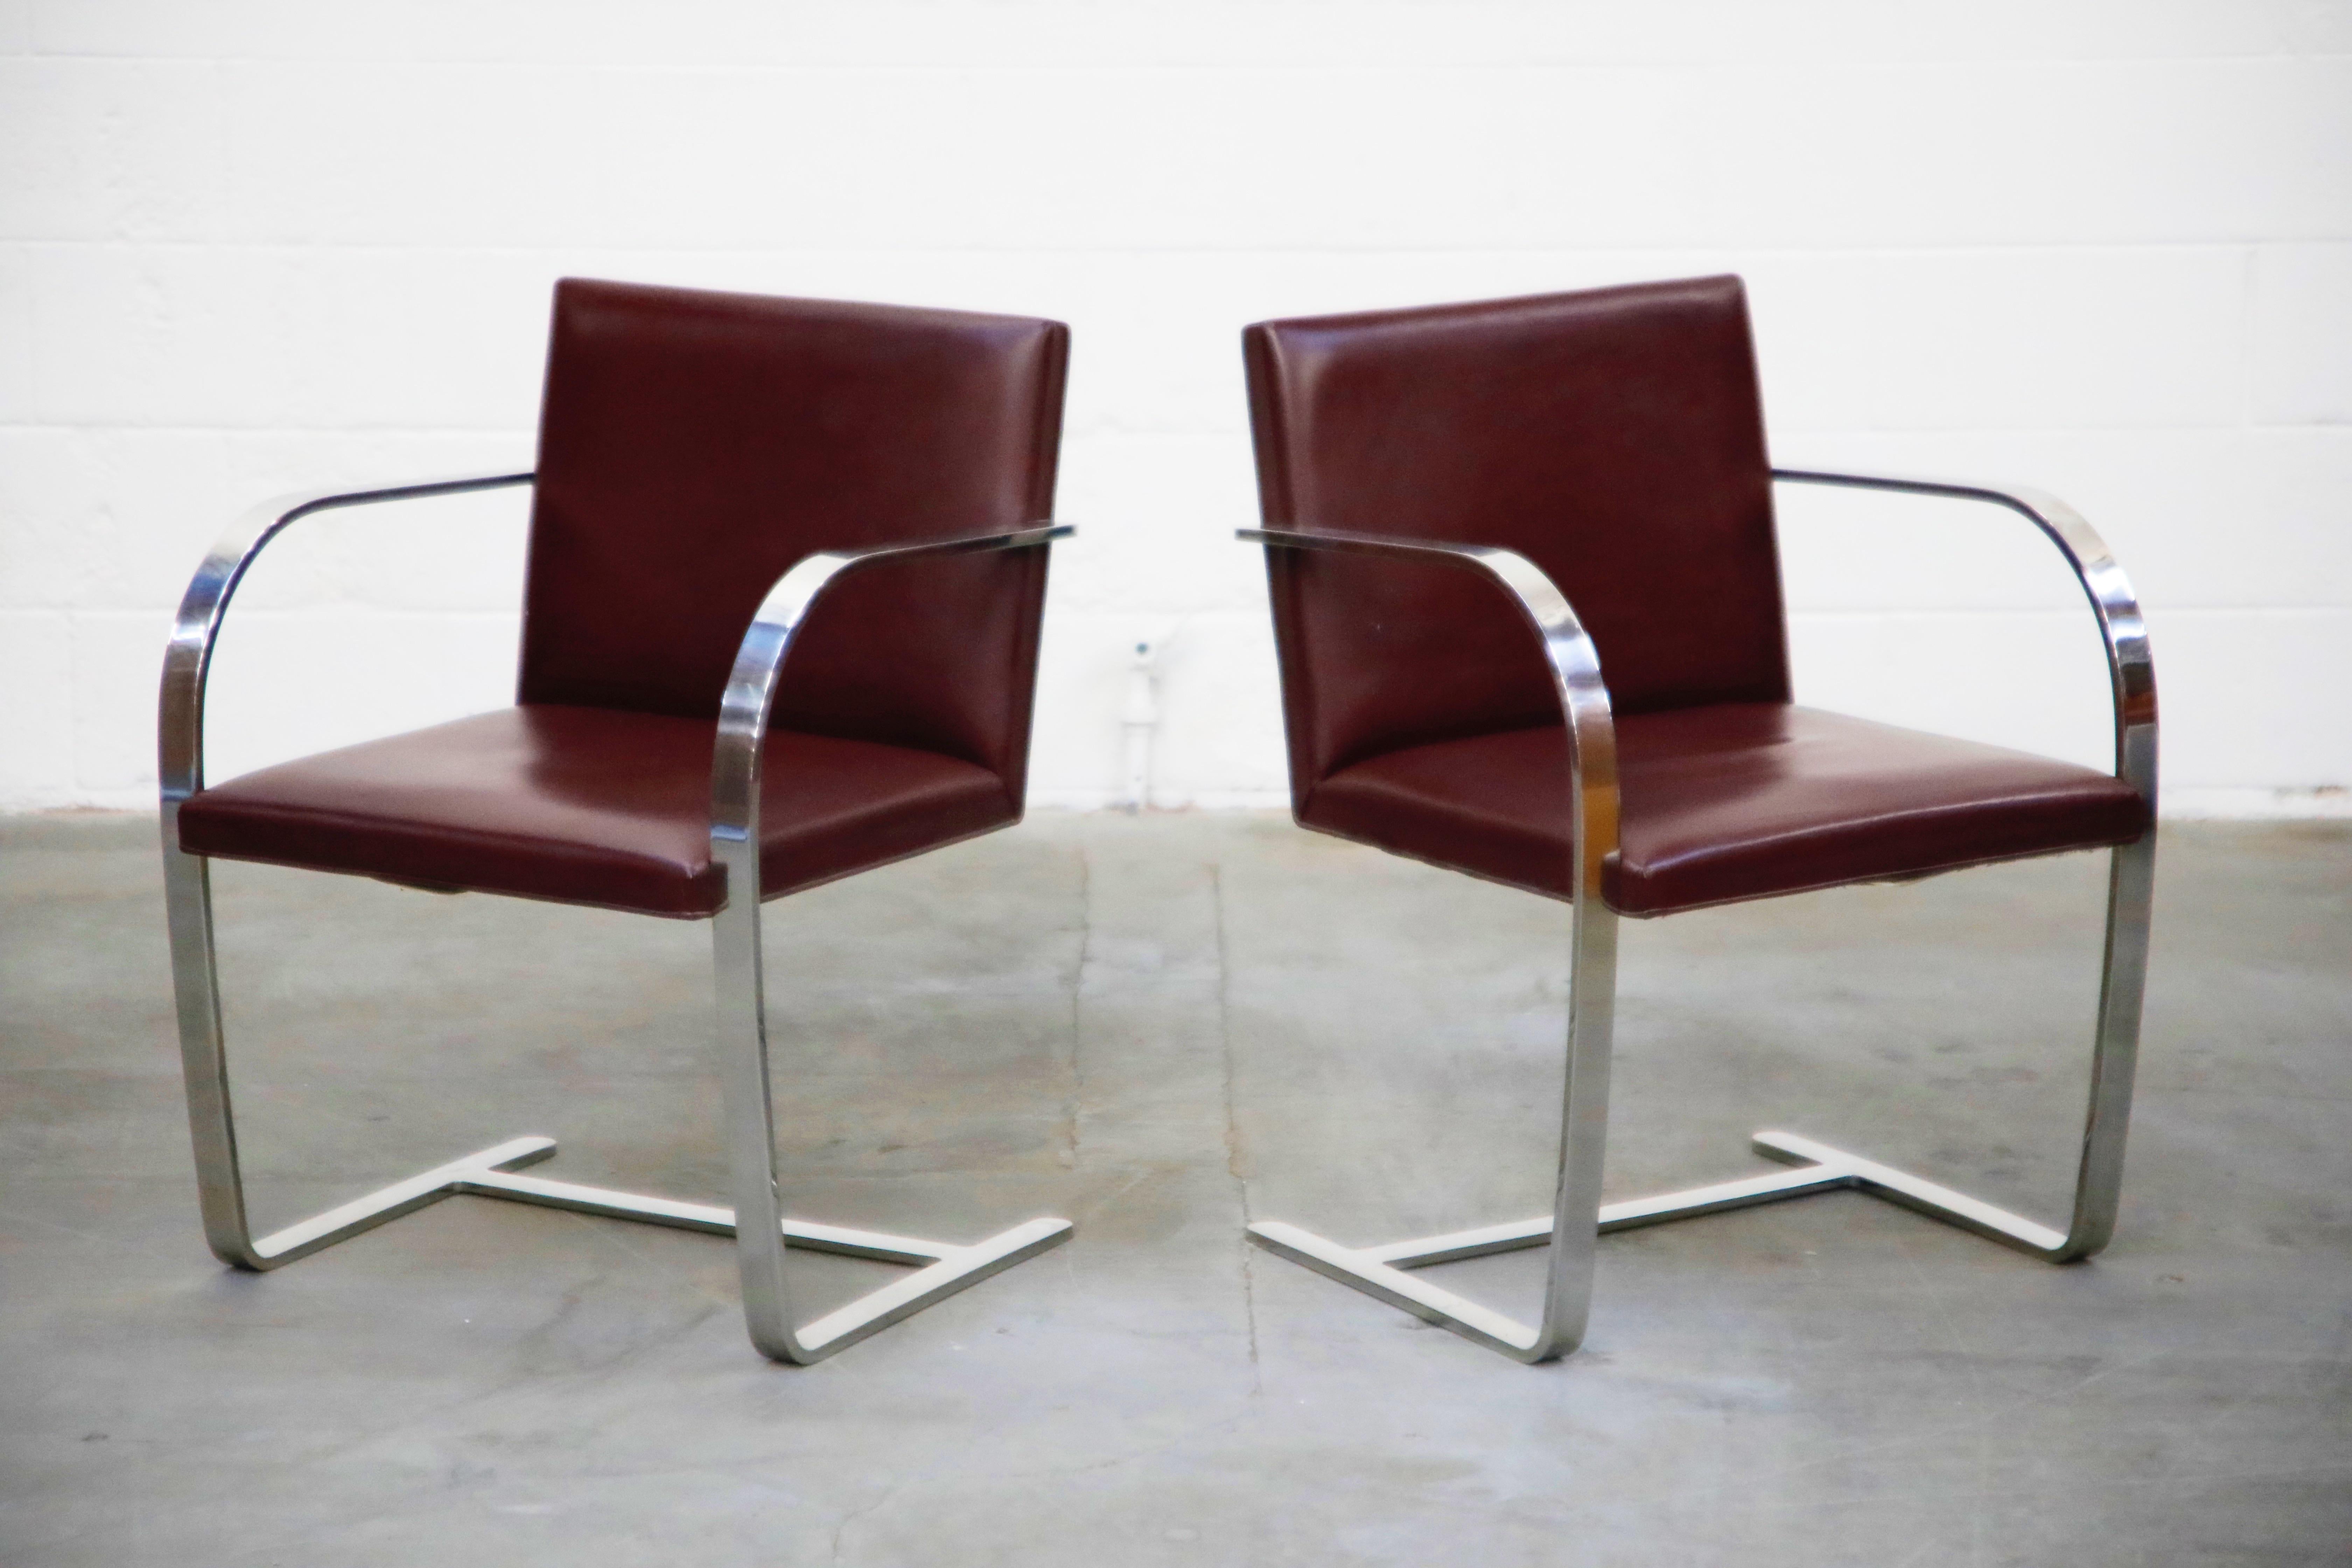 Stainless Steel Knoll International Burgundy Leather 'Brno' Chairs by Mies van der Rohe, Signed